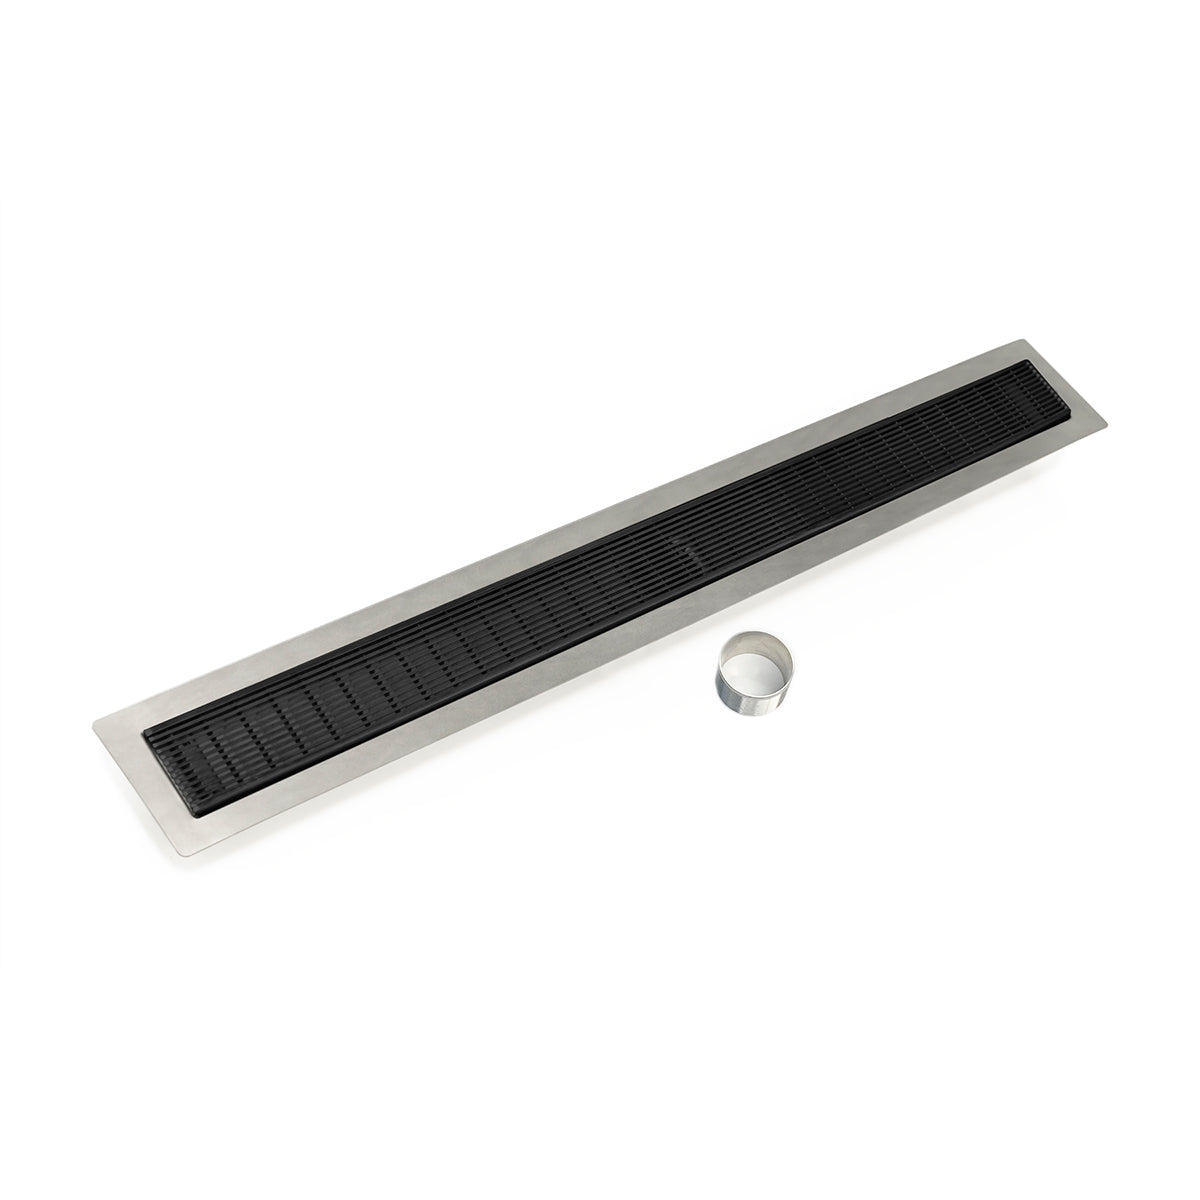 Infinity Drain 42" FCB Series Double Waterproofing Linear Drain Kit with 2 1/2" Wedge Wire Grate